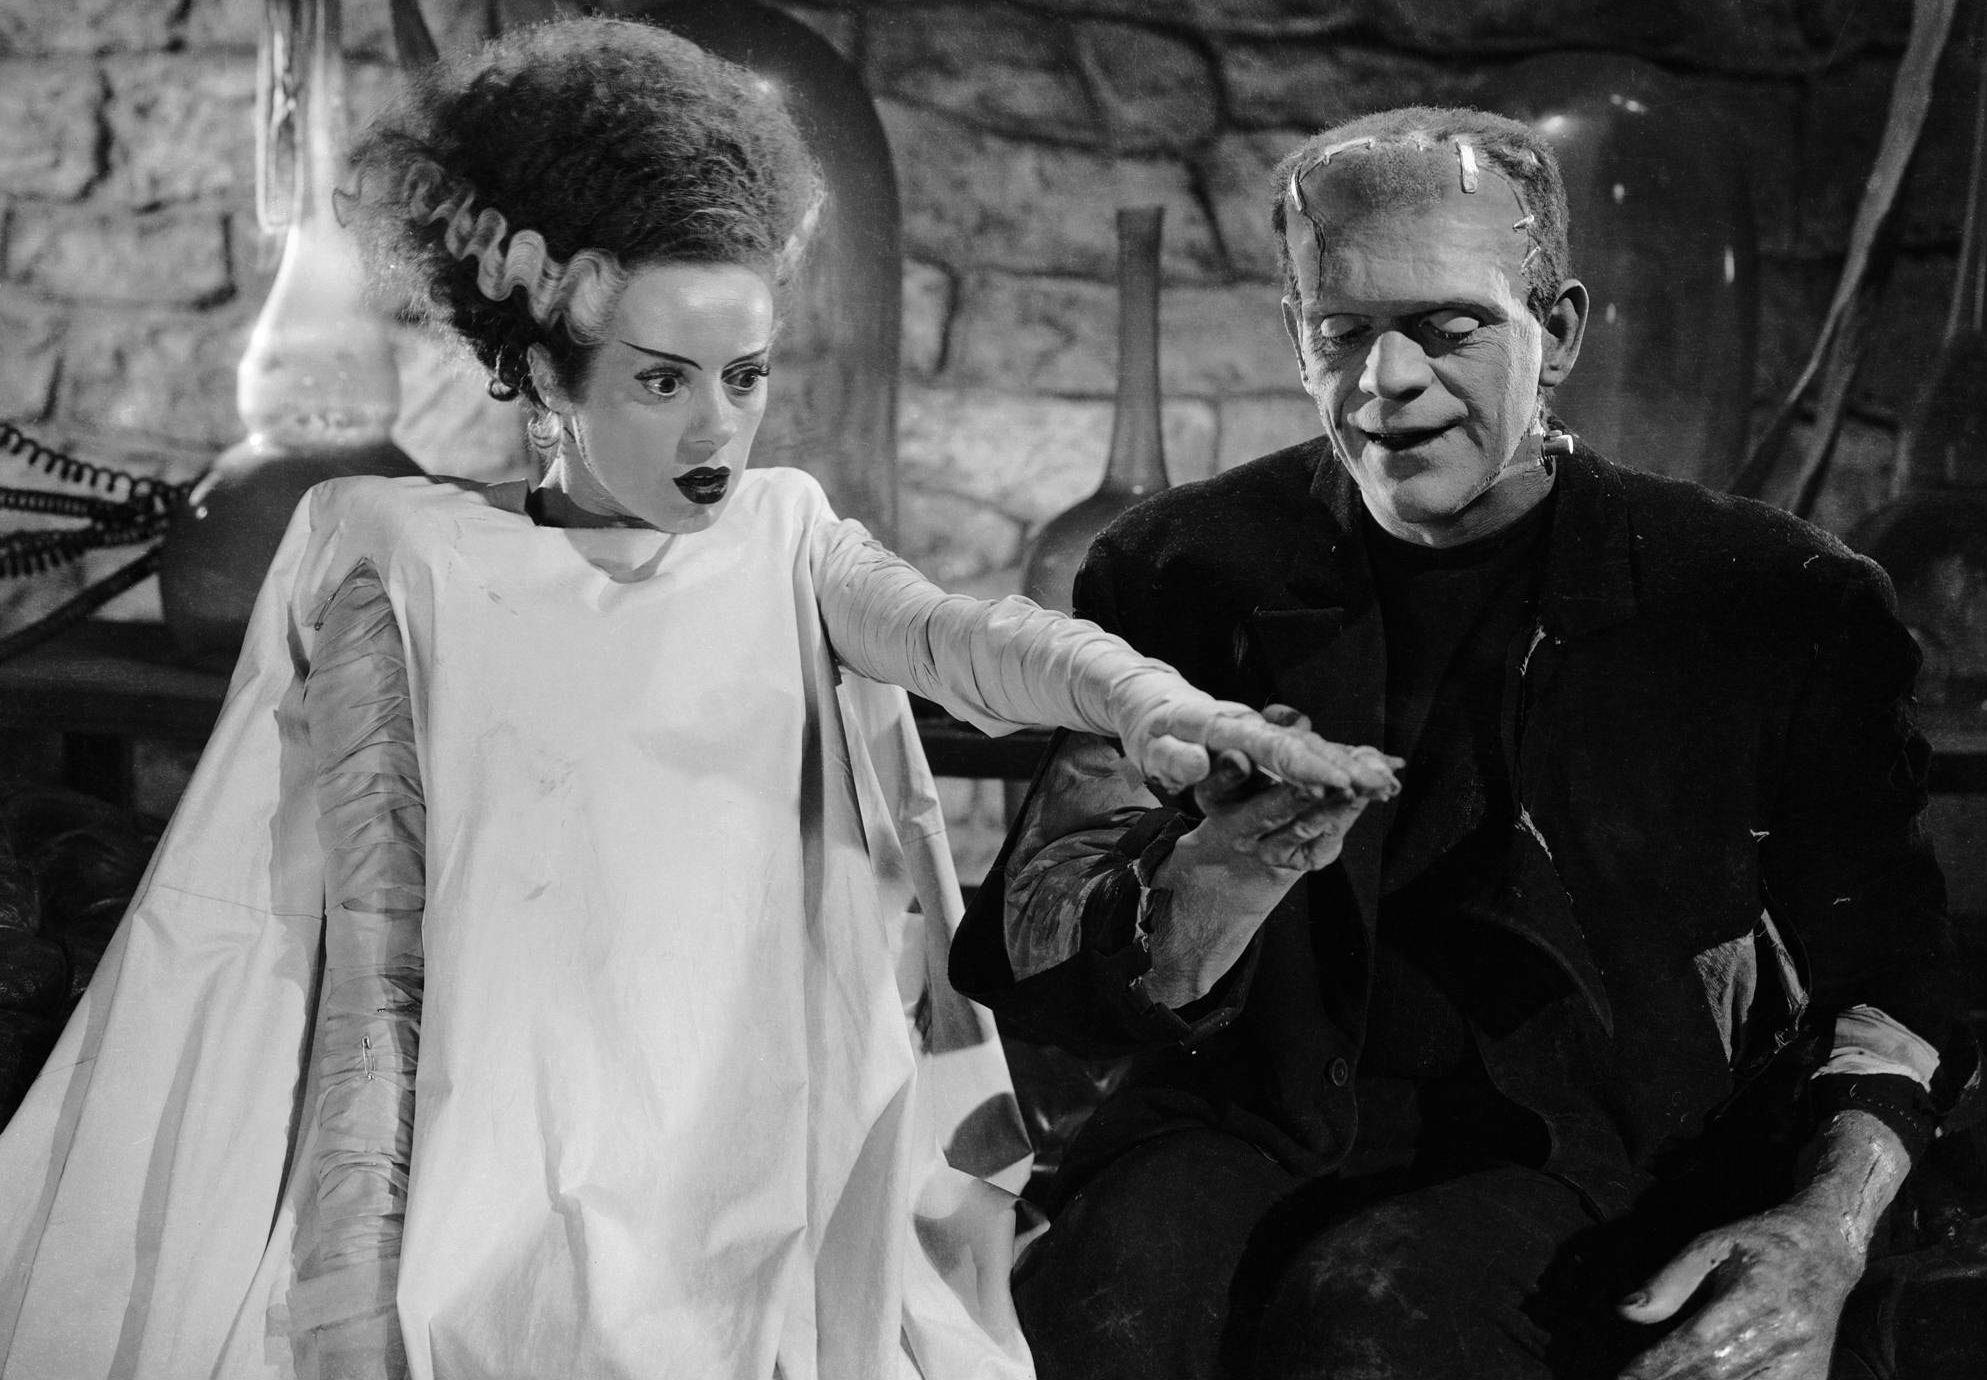 The Bride of Frankenstein Wallpaper and Background Image